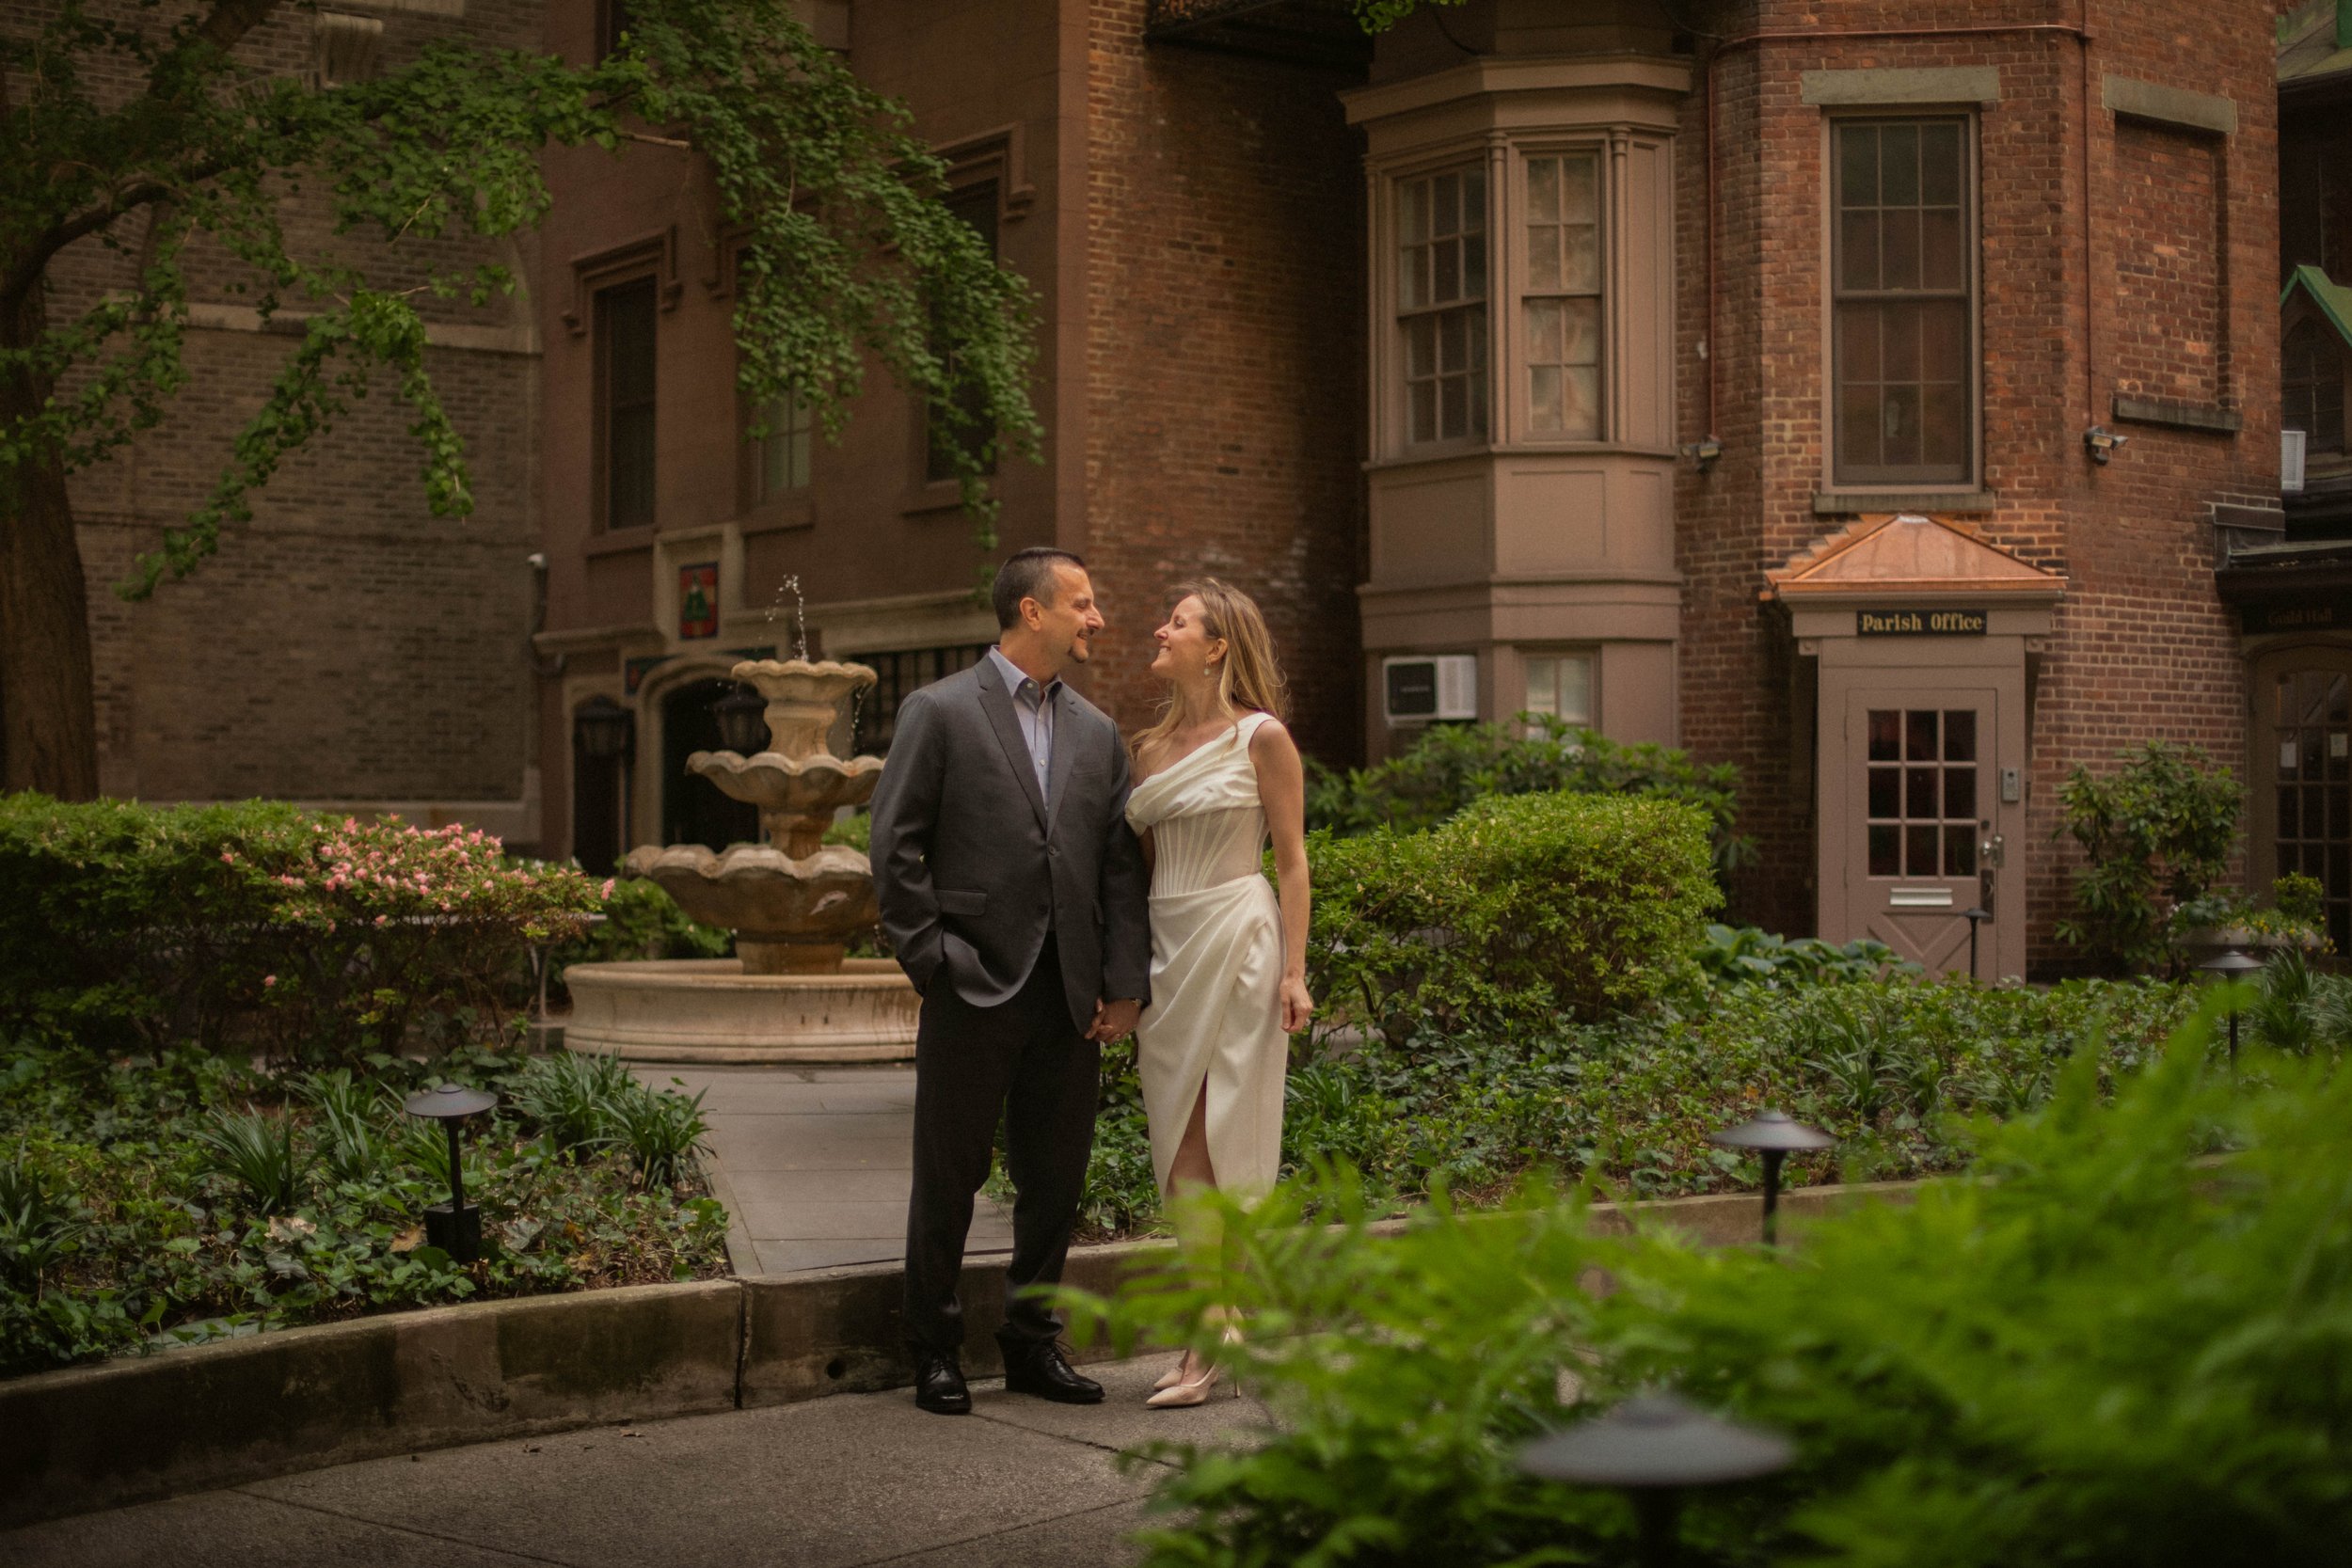 Intimate moments captured in the courtyard of this iconic NYC church. 📸 #ElopementPhotographer #NYCWeddings